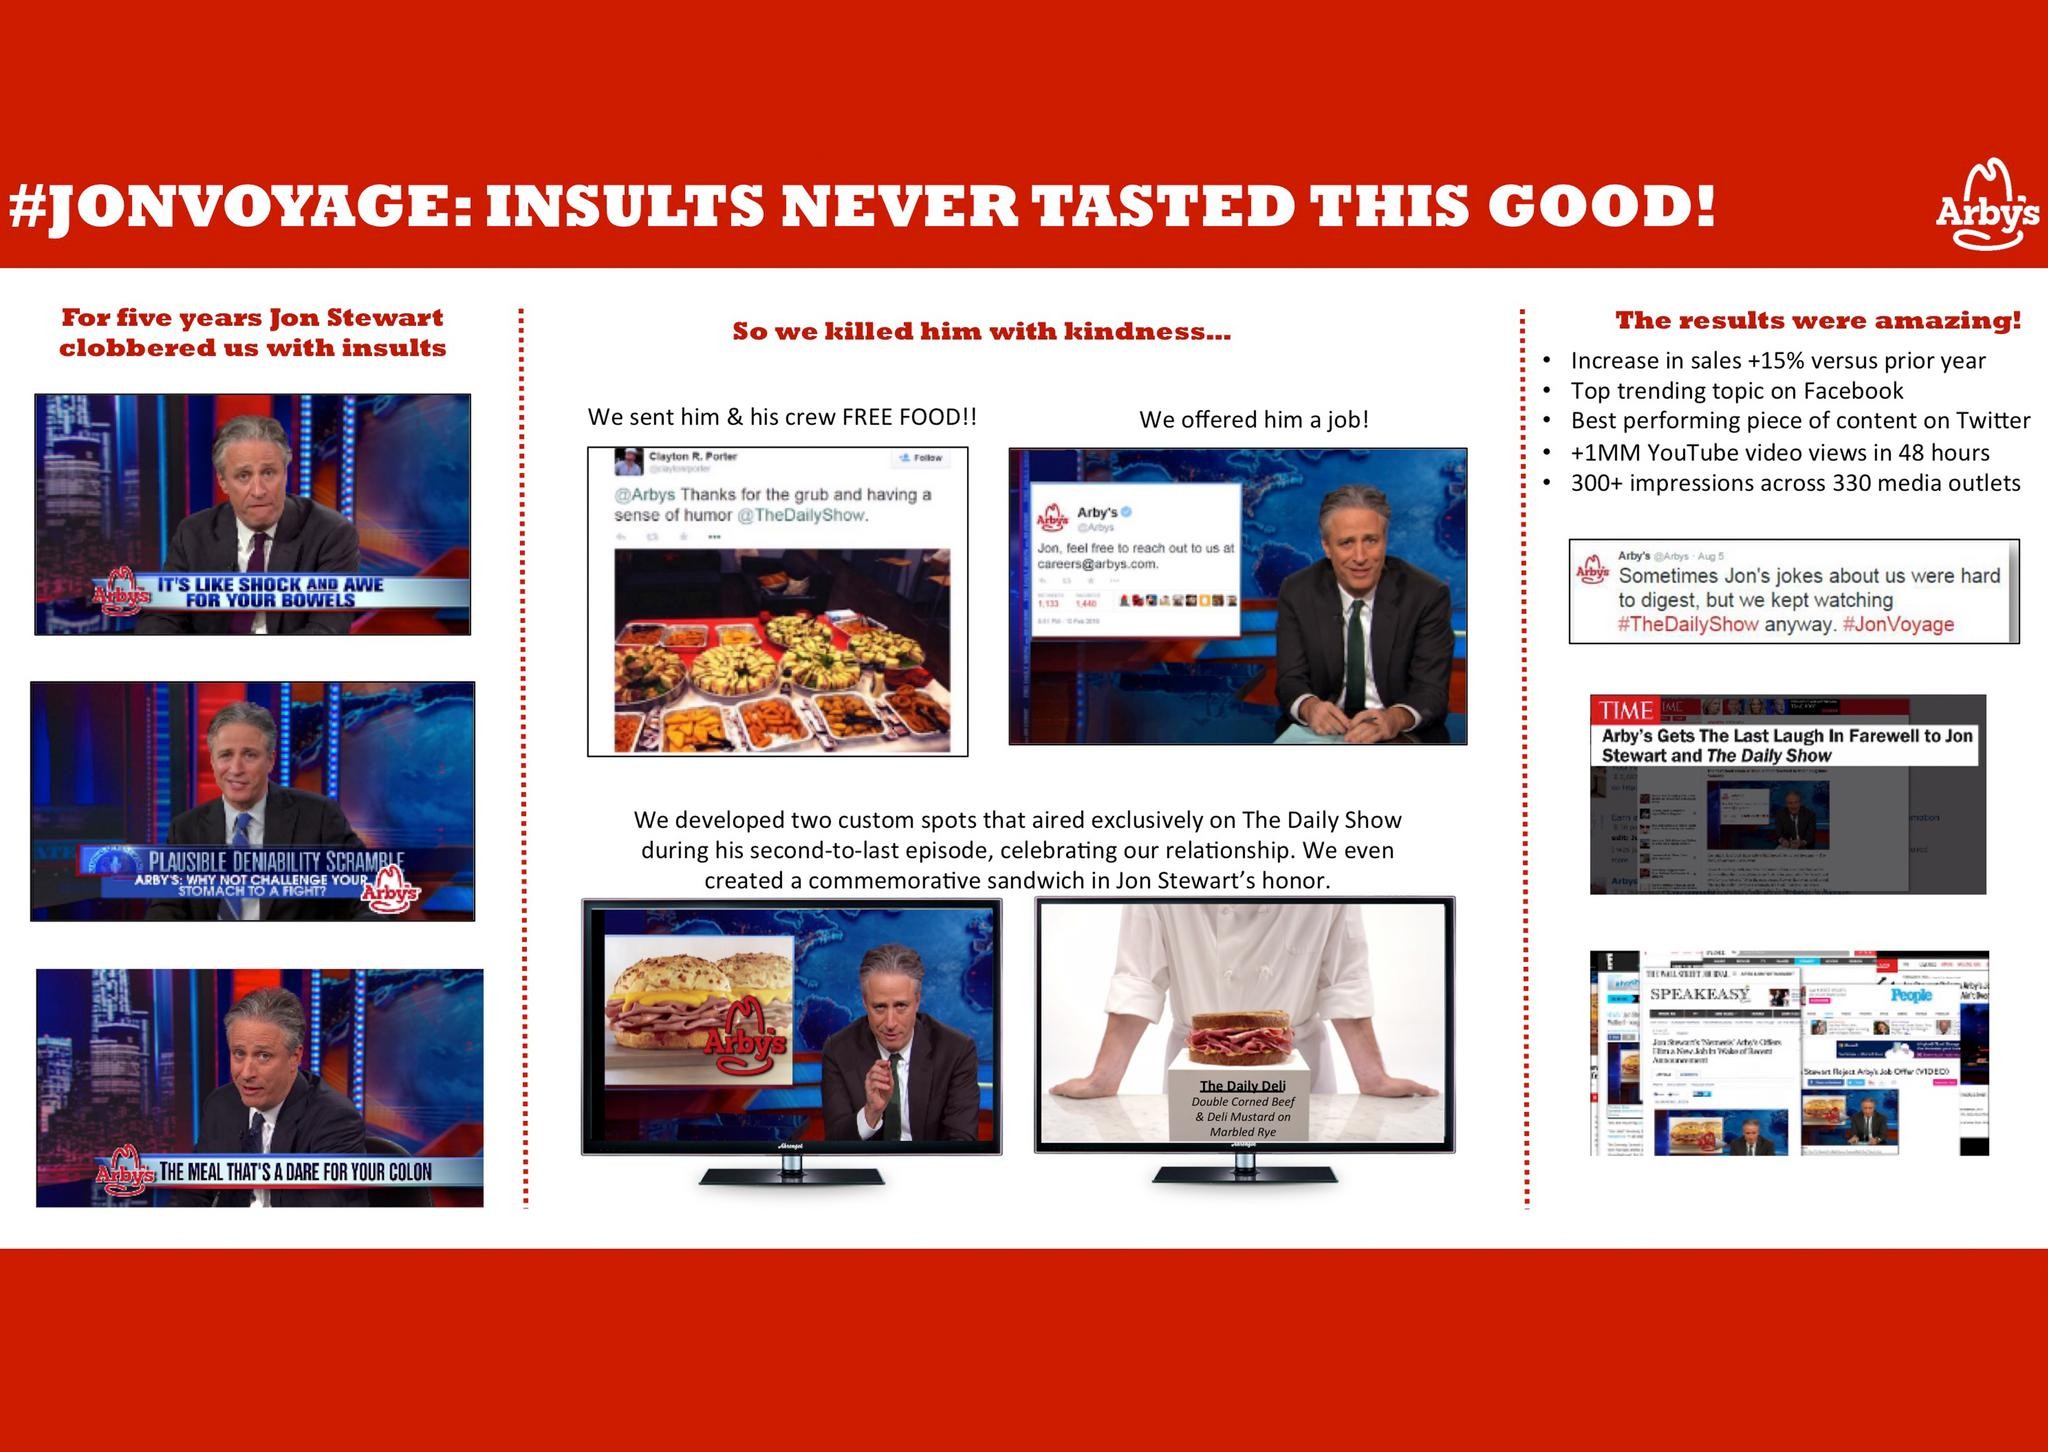 ARBY'S #JONVOYAGE: INSULTS NEVER TASTED THIS GOOD!